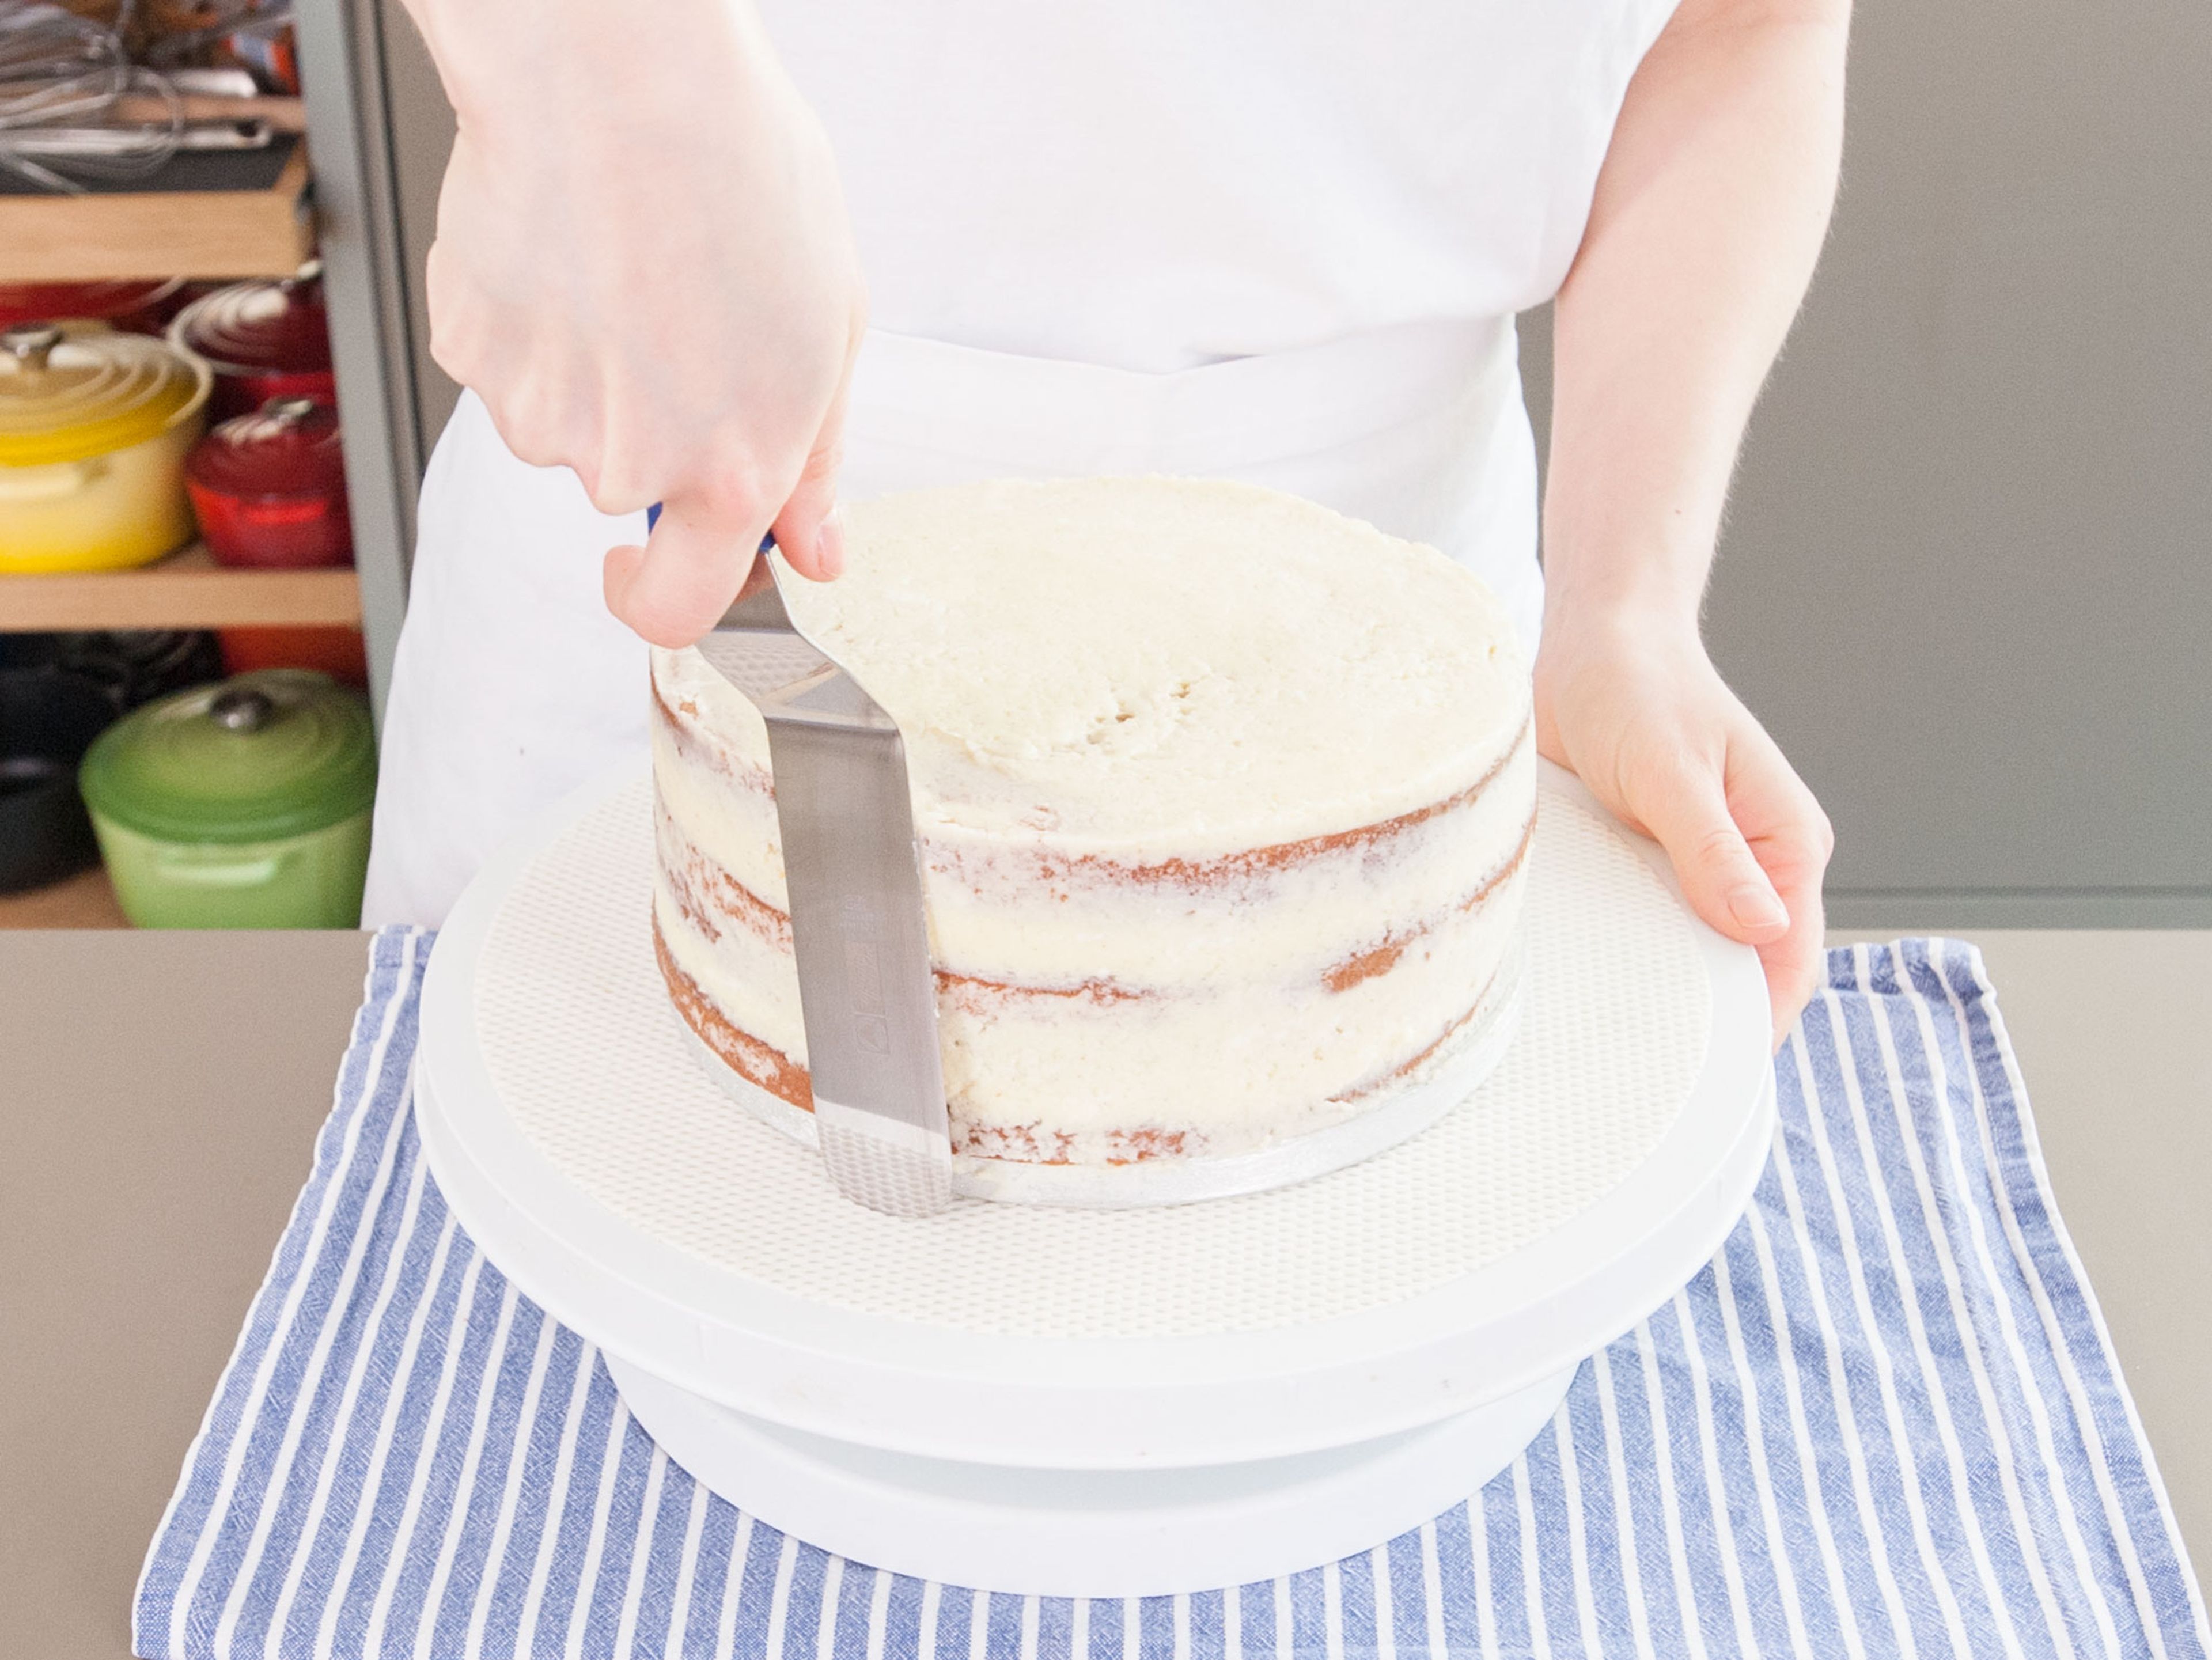 Apply a crumb coat to each tier by spreading a thin layer of buttercream over the tops and sides. Scrape and clean spatula as you go to prevent spreading more crumbs into buttercream. Place tiers in refrigerator for at least 30 minutes to firm up before proceeding.